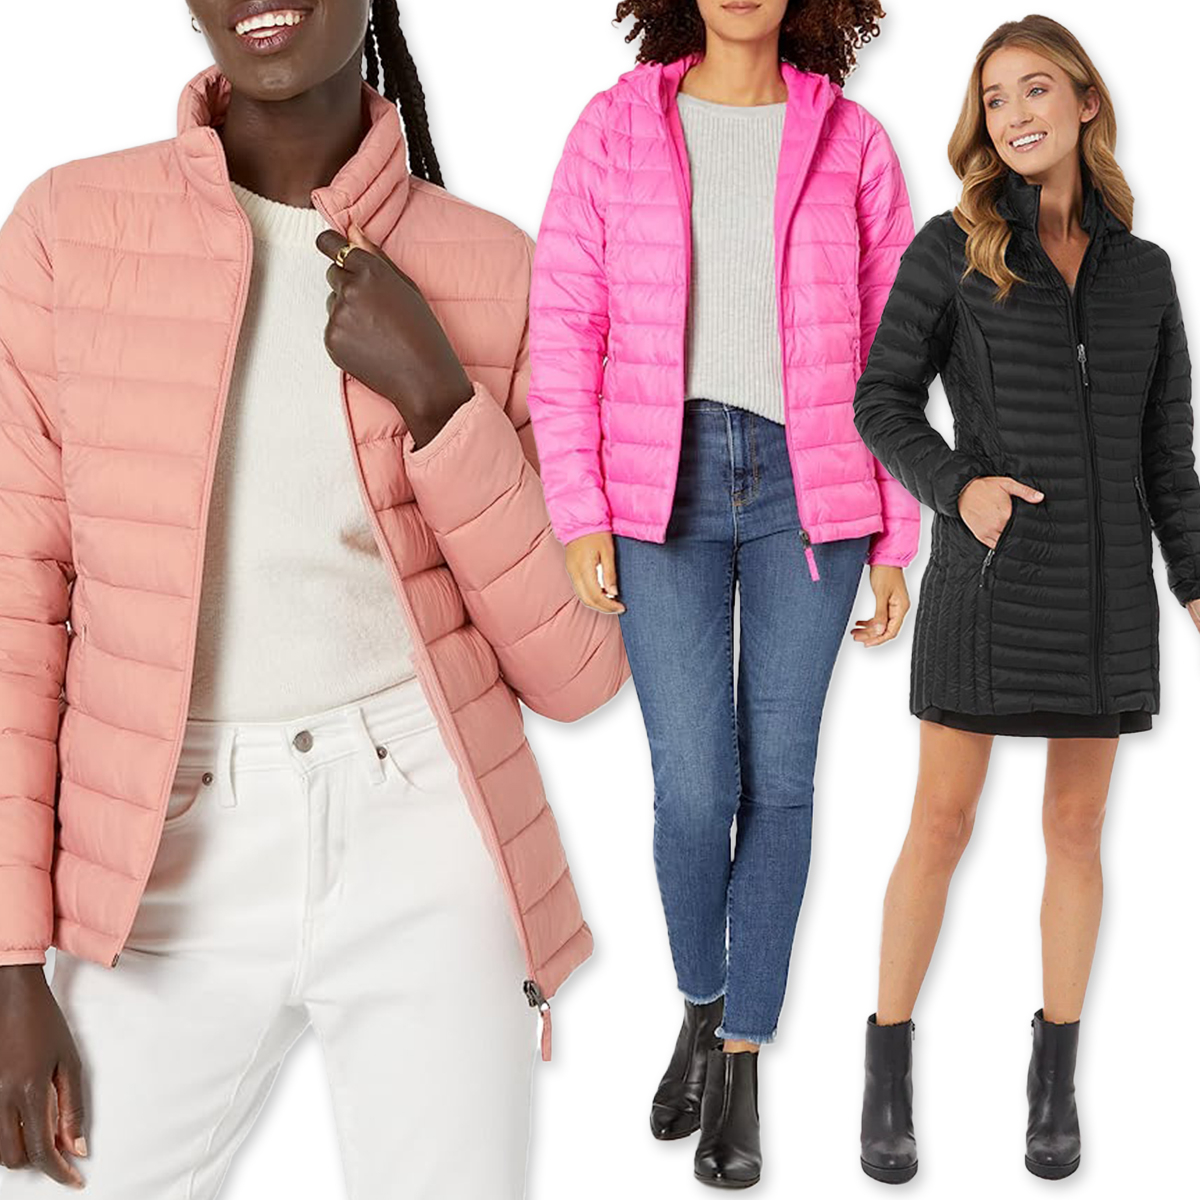 The Best Deals on Packable Jackets for Confusing Fall Weather: Lululemon, Sam Edelman, 32 Degrees & More